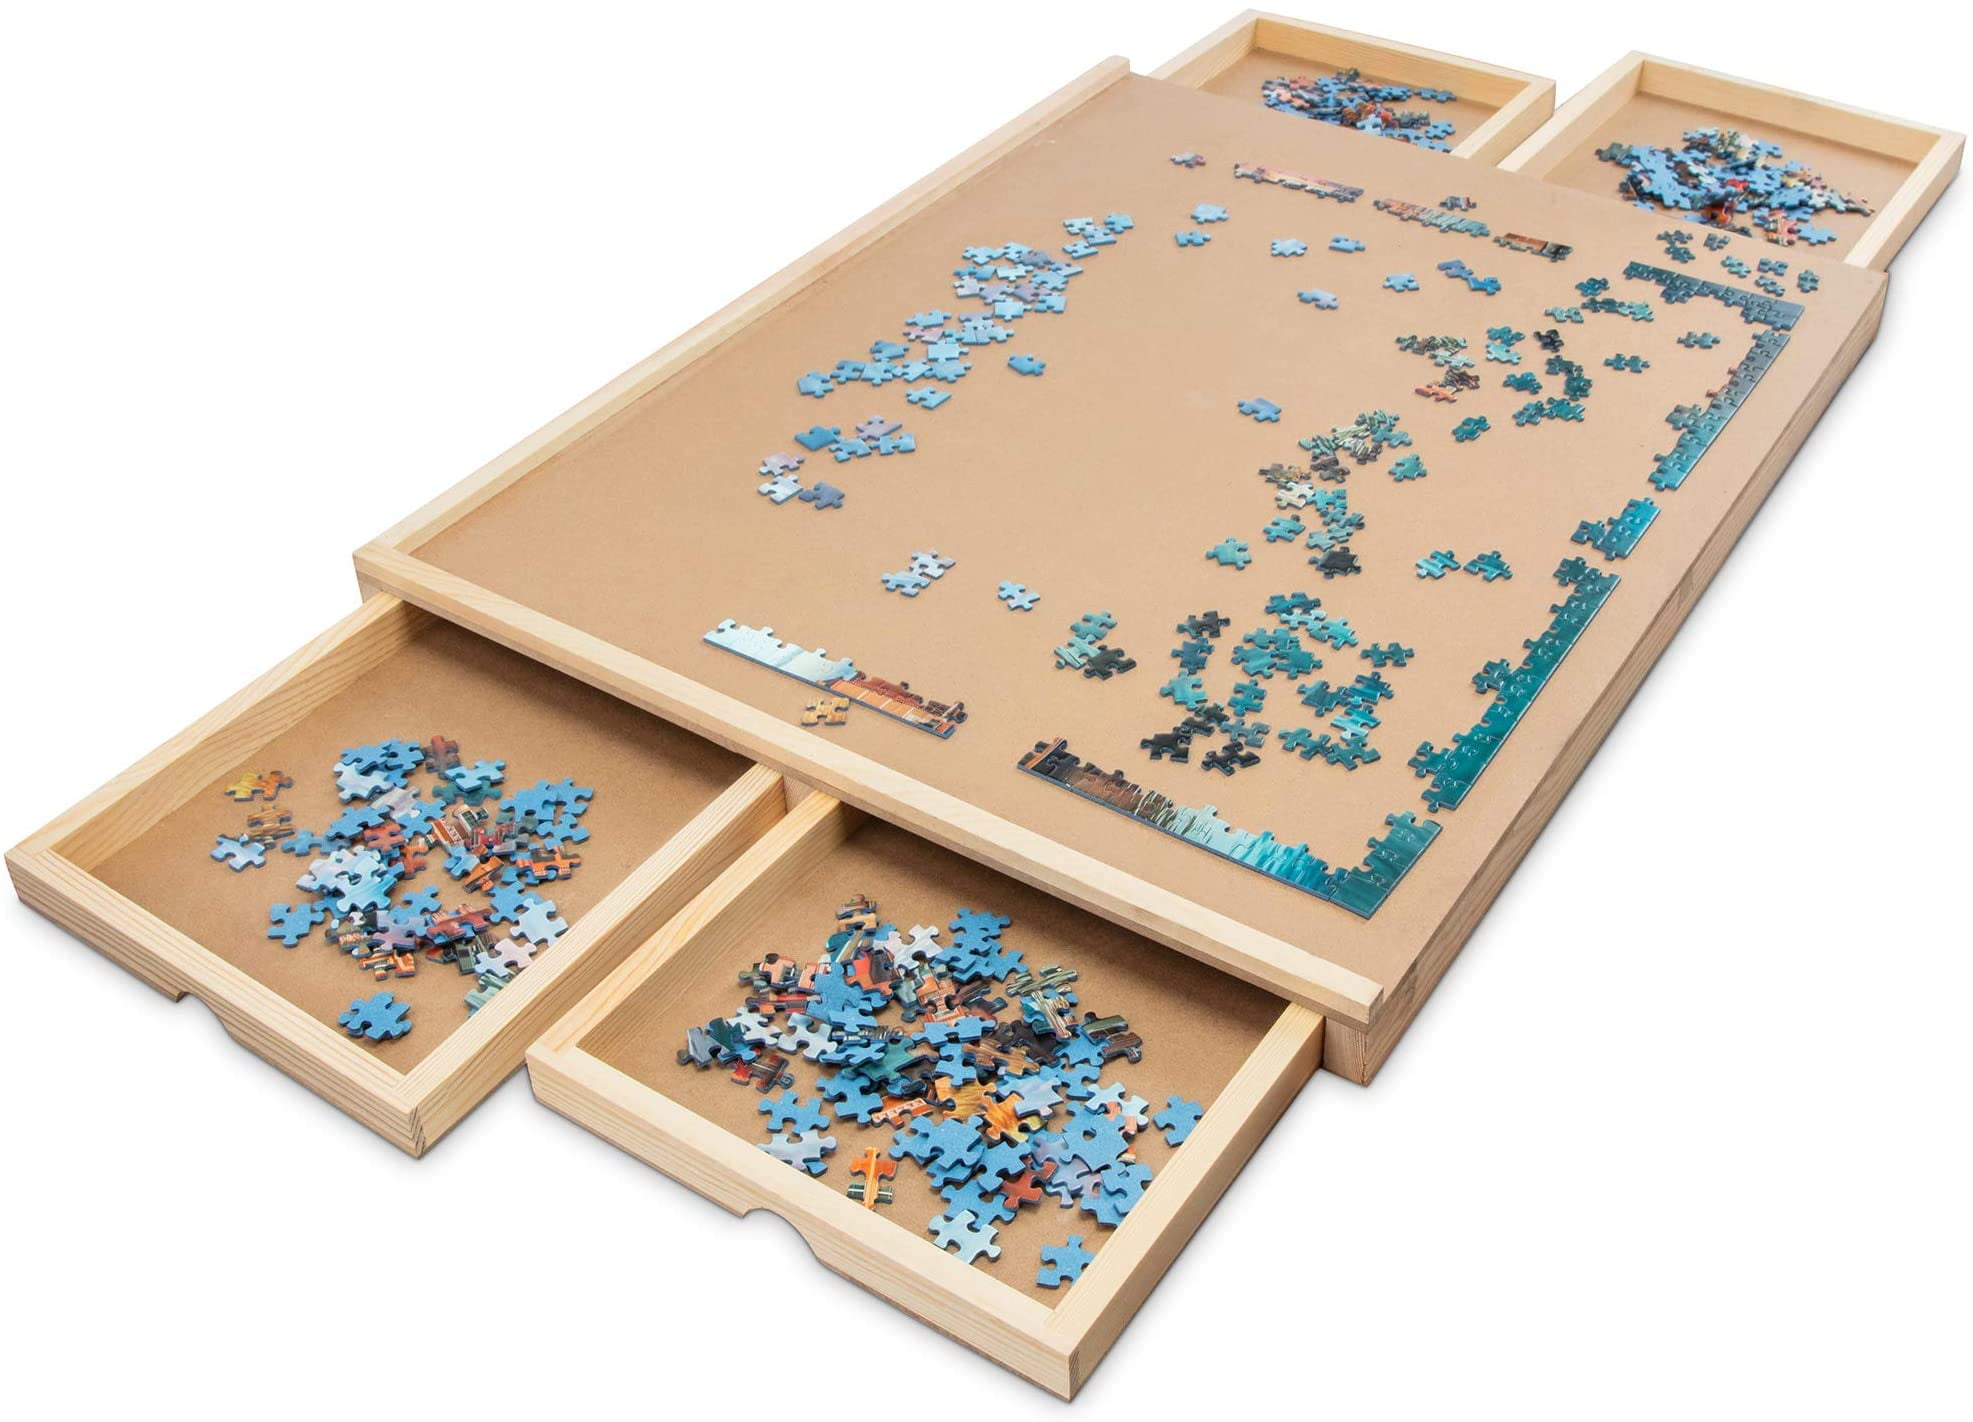 Bits and Pieces The Original Jumbo 1500 pc Wooden Puzzle Plateau-Smooth Work 